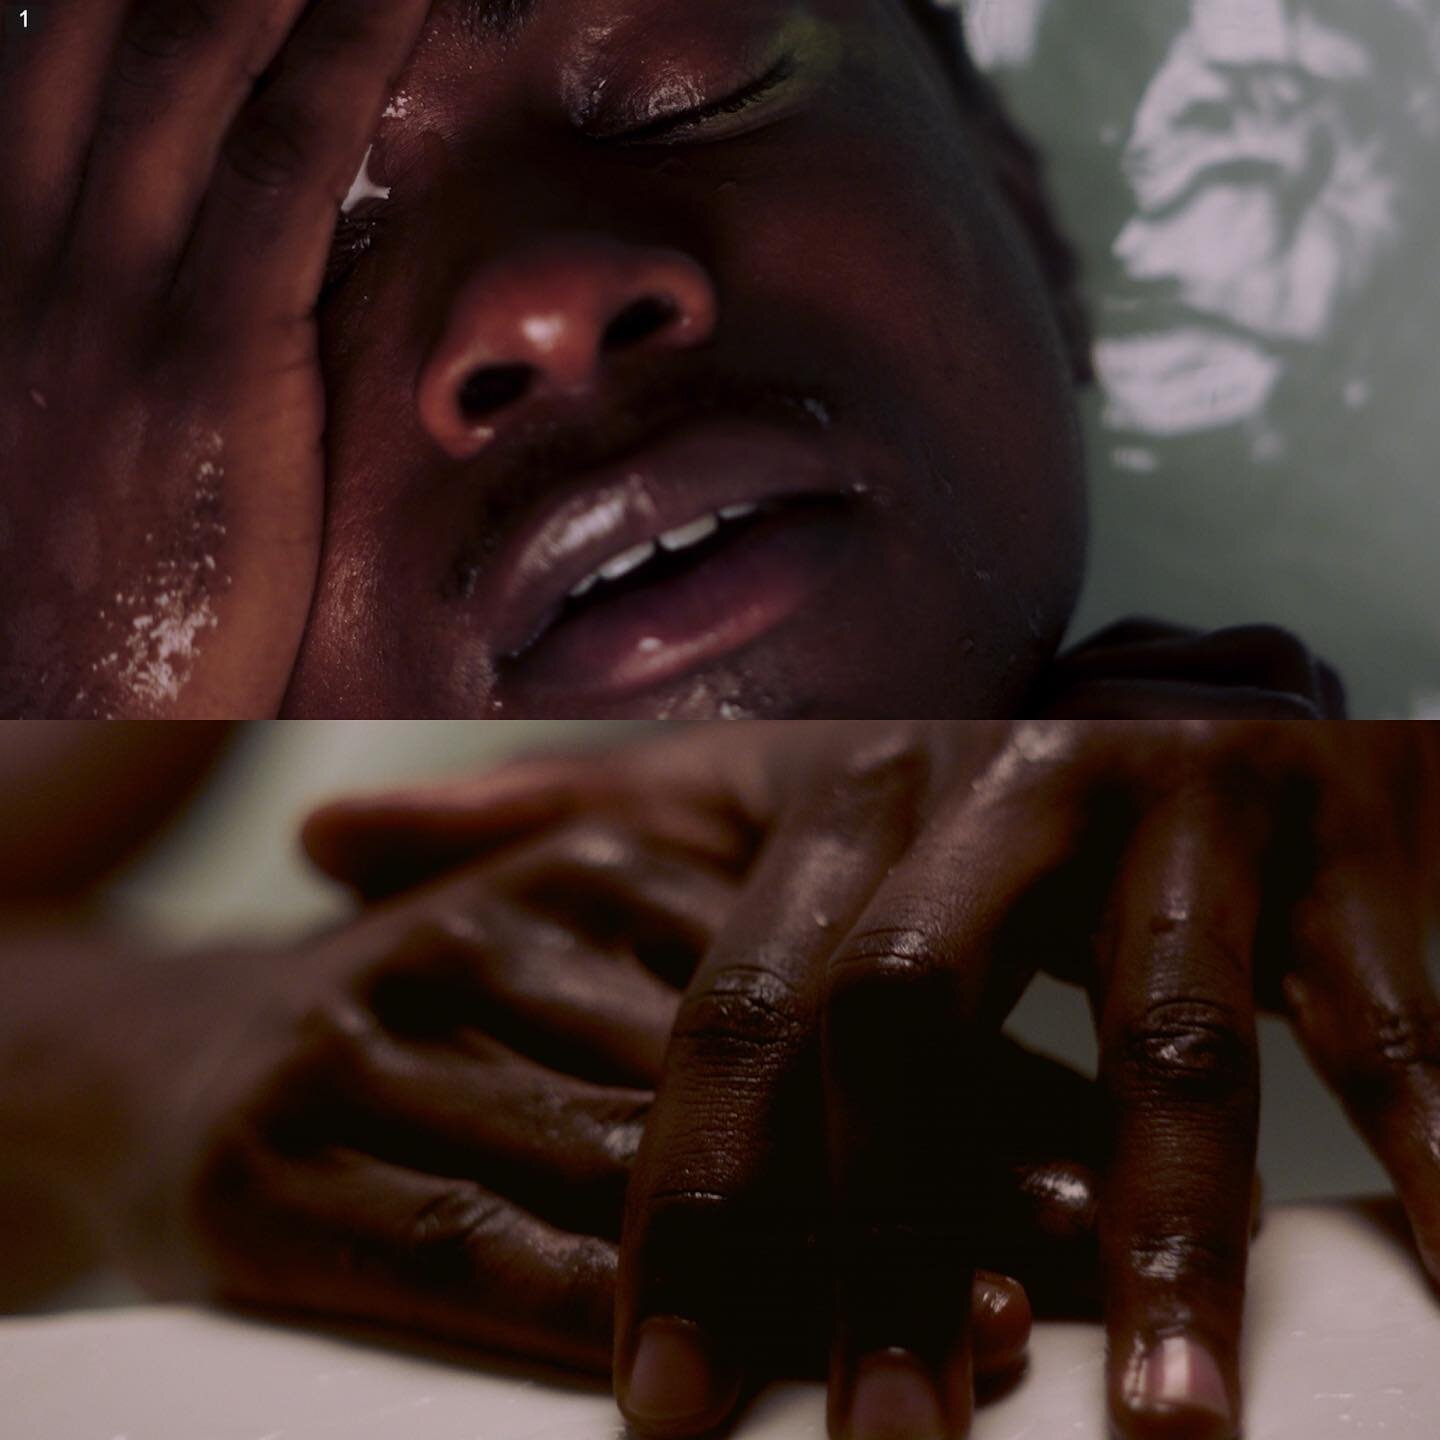 More stills from @elkkamusic #euphoricmelodies video featuring @tabooade